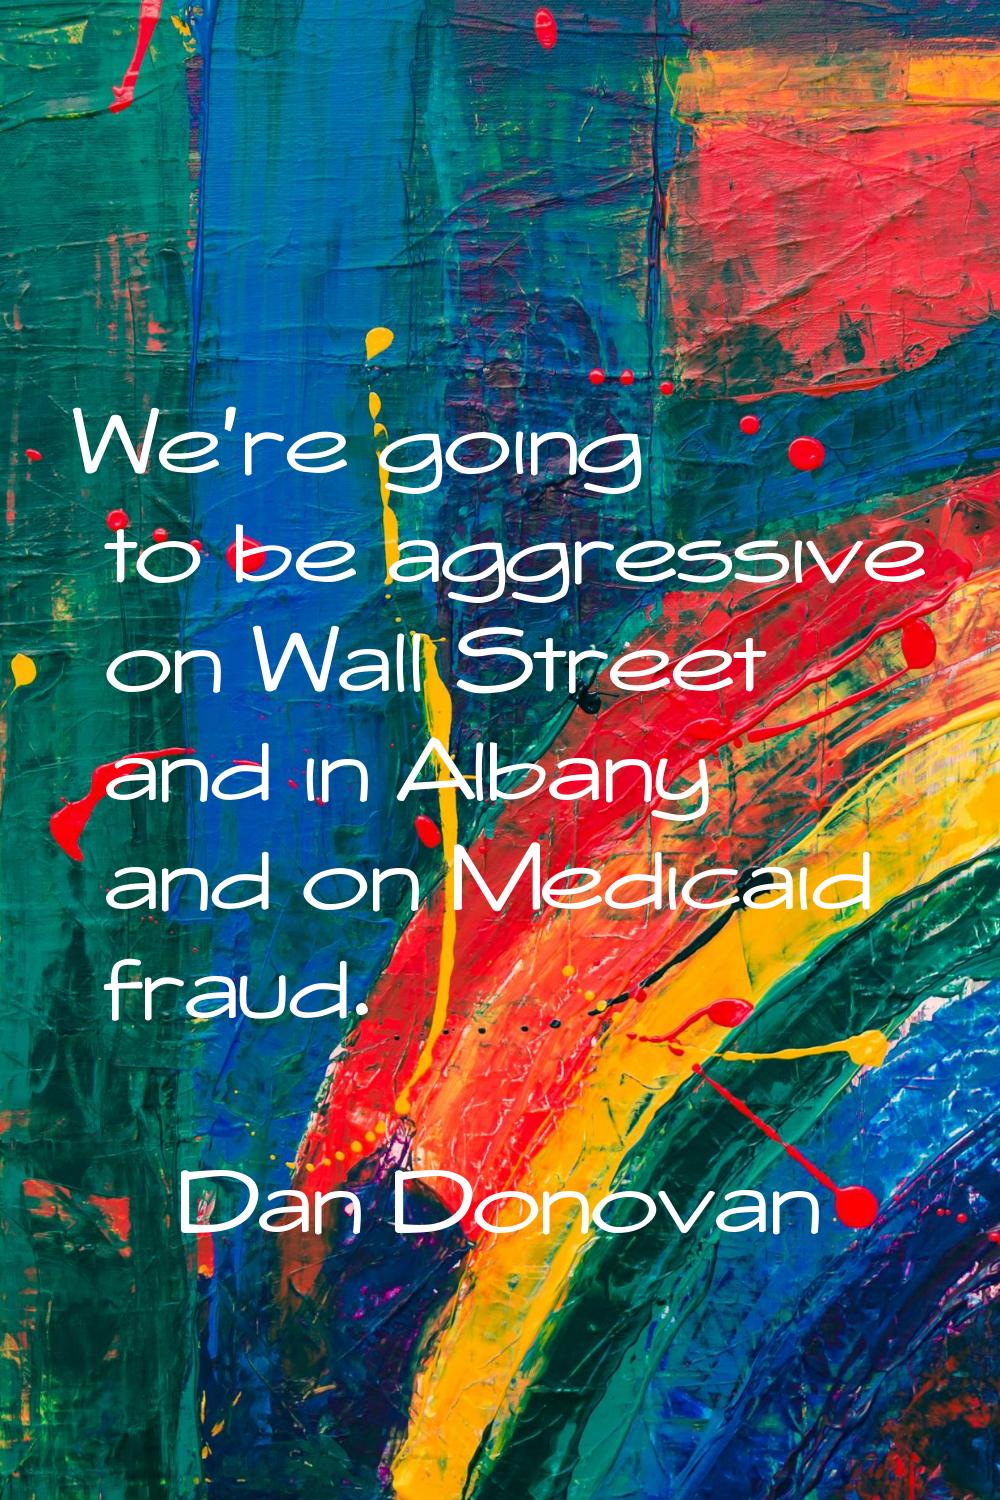 We're going to be aggressive on Wall Street and in Albany and on Medicaid fraud.